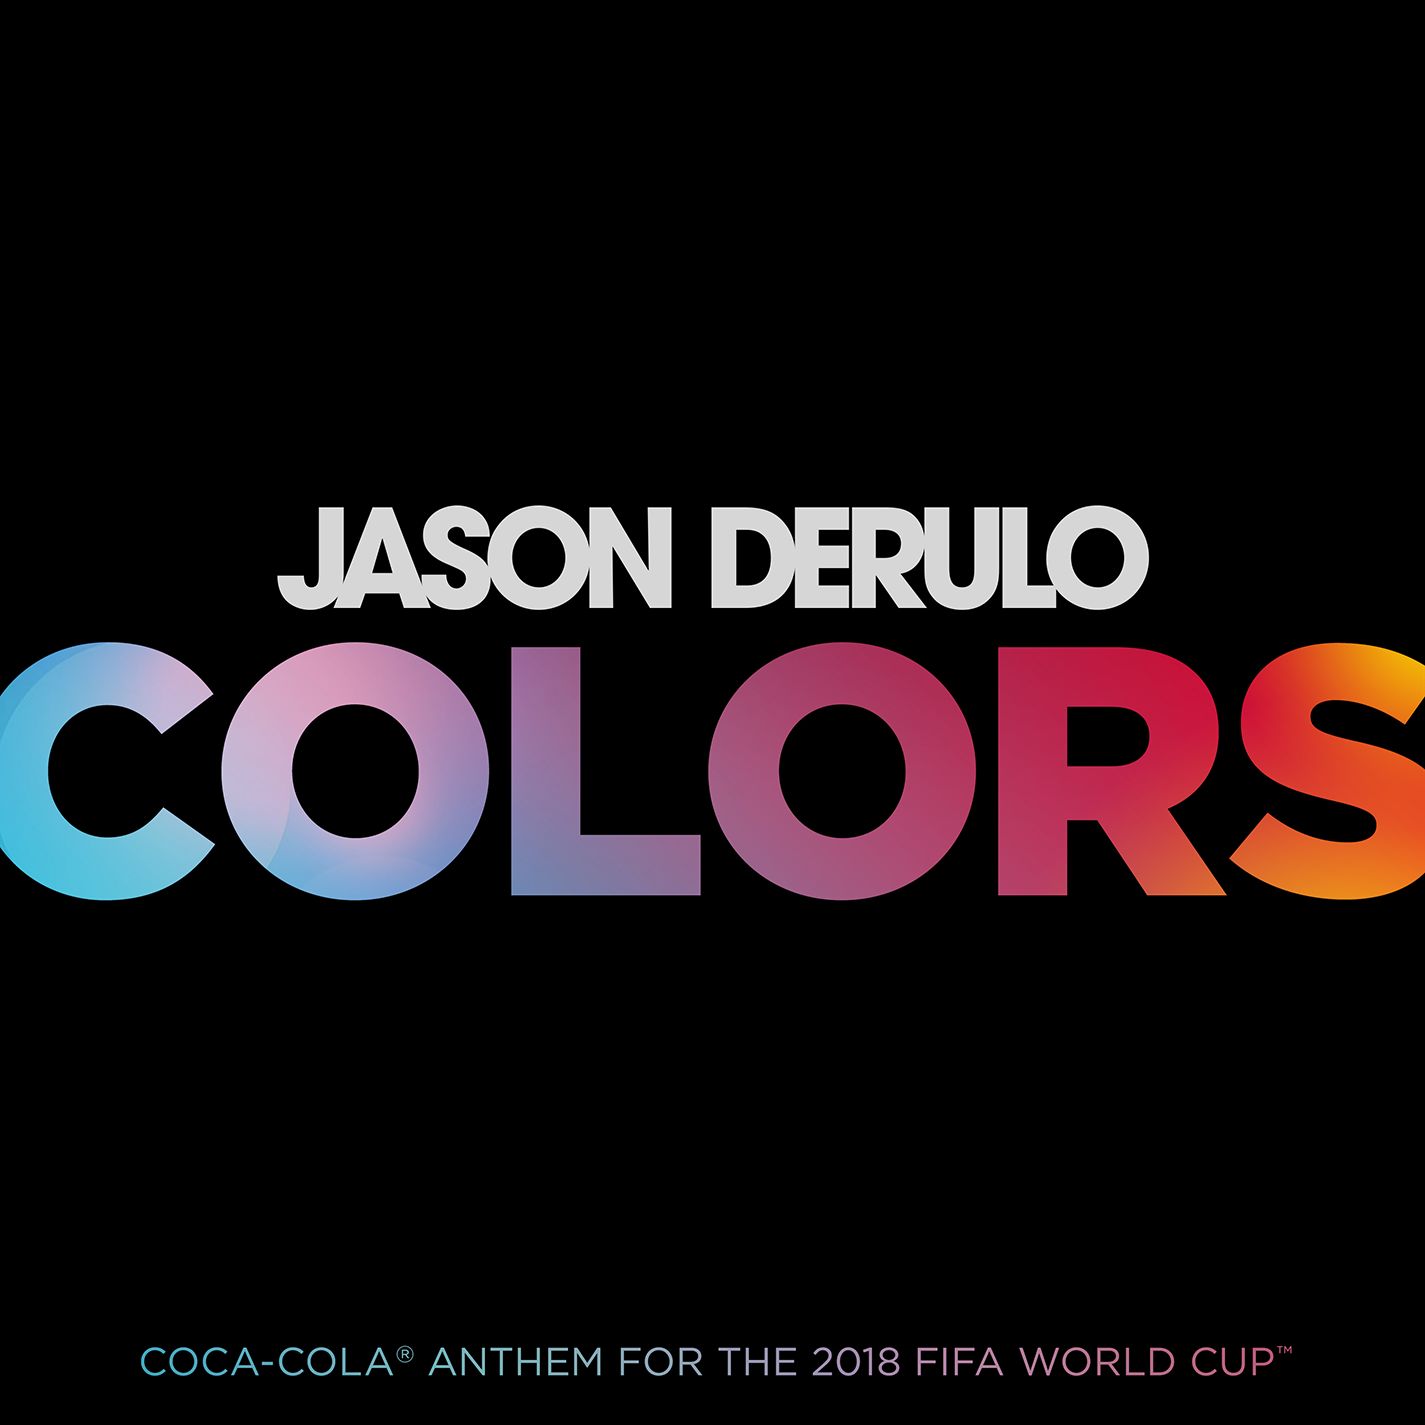 Colors CocaCola Anthem, 2018 FIFA World CupTM